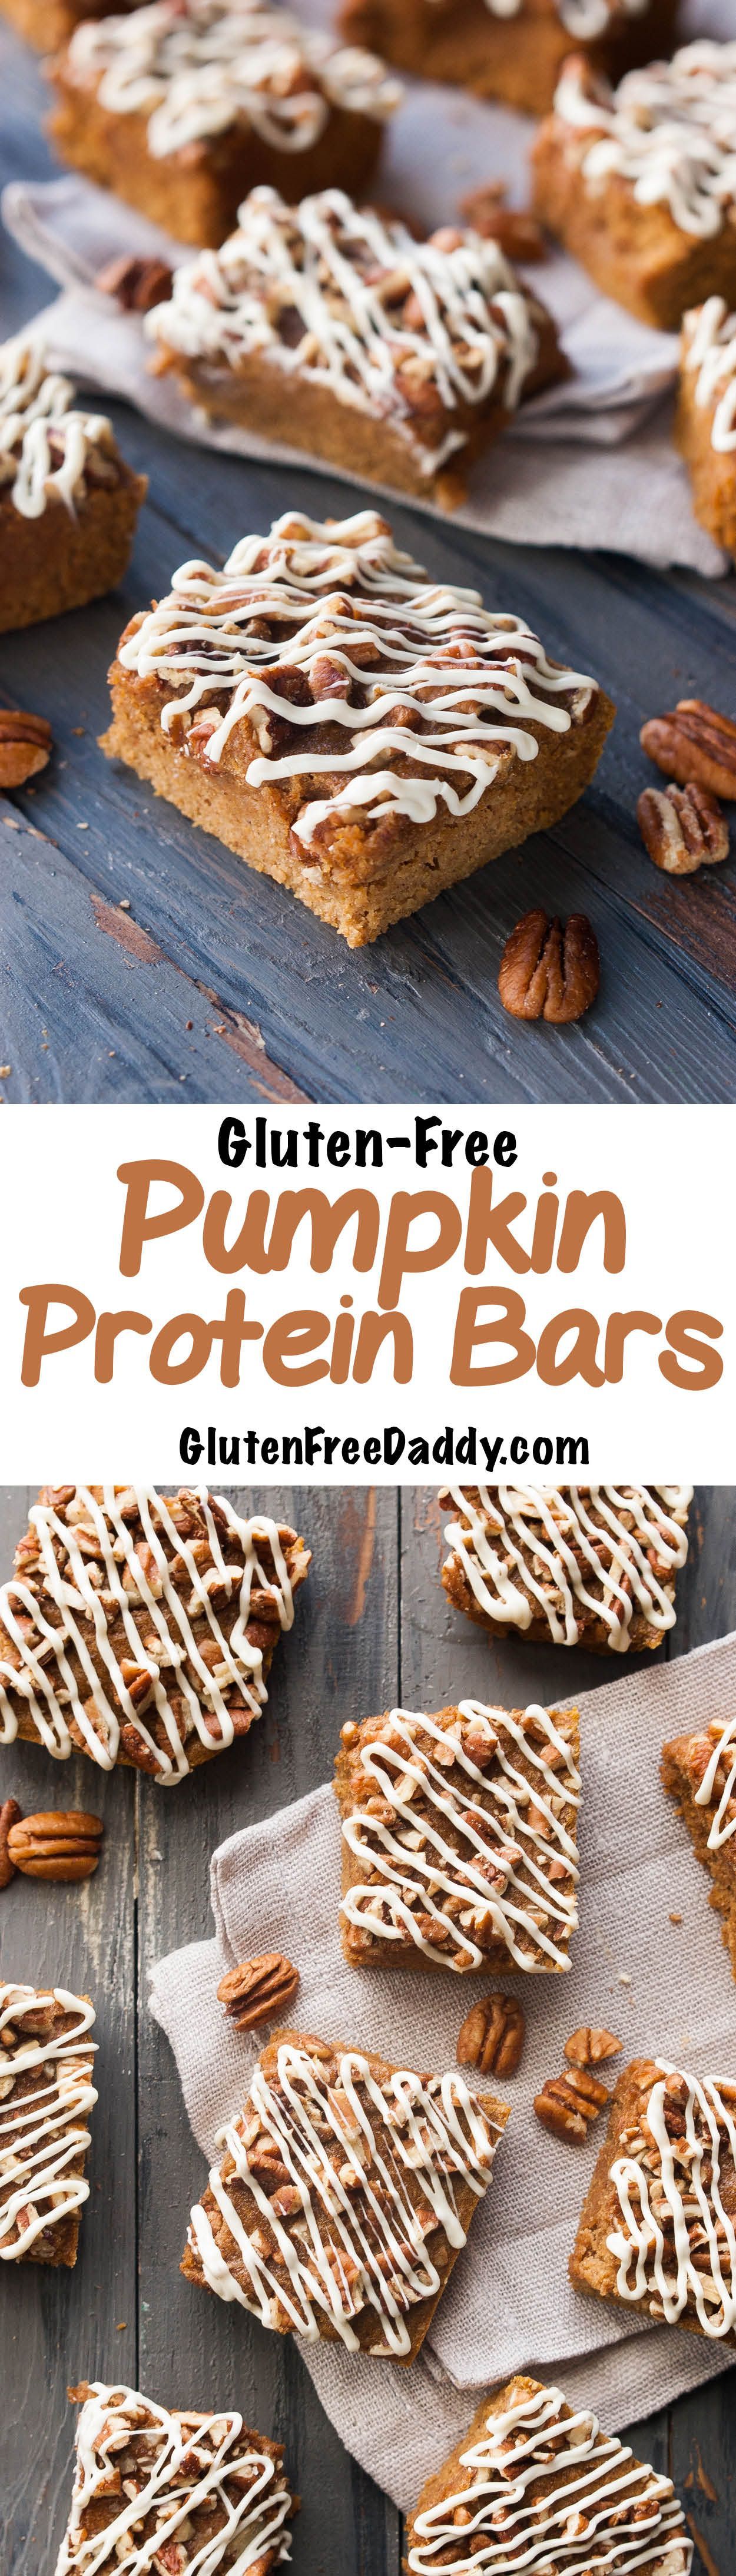 I love to make these pumpkin protein bars because you can’t taste the protein powder, so myself and kids actually take our protein